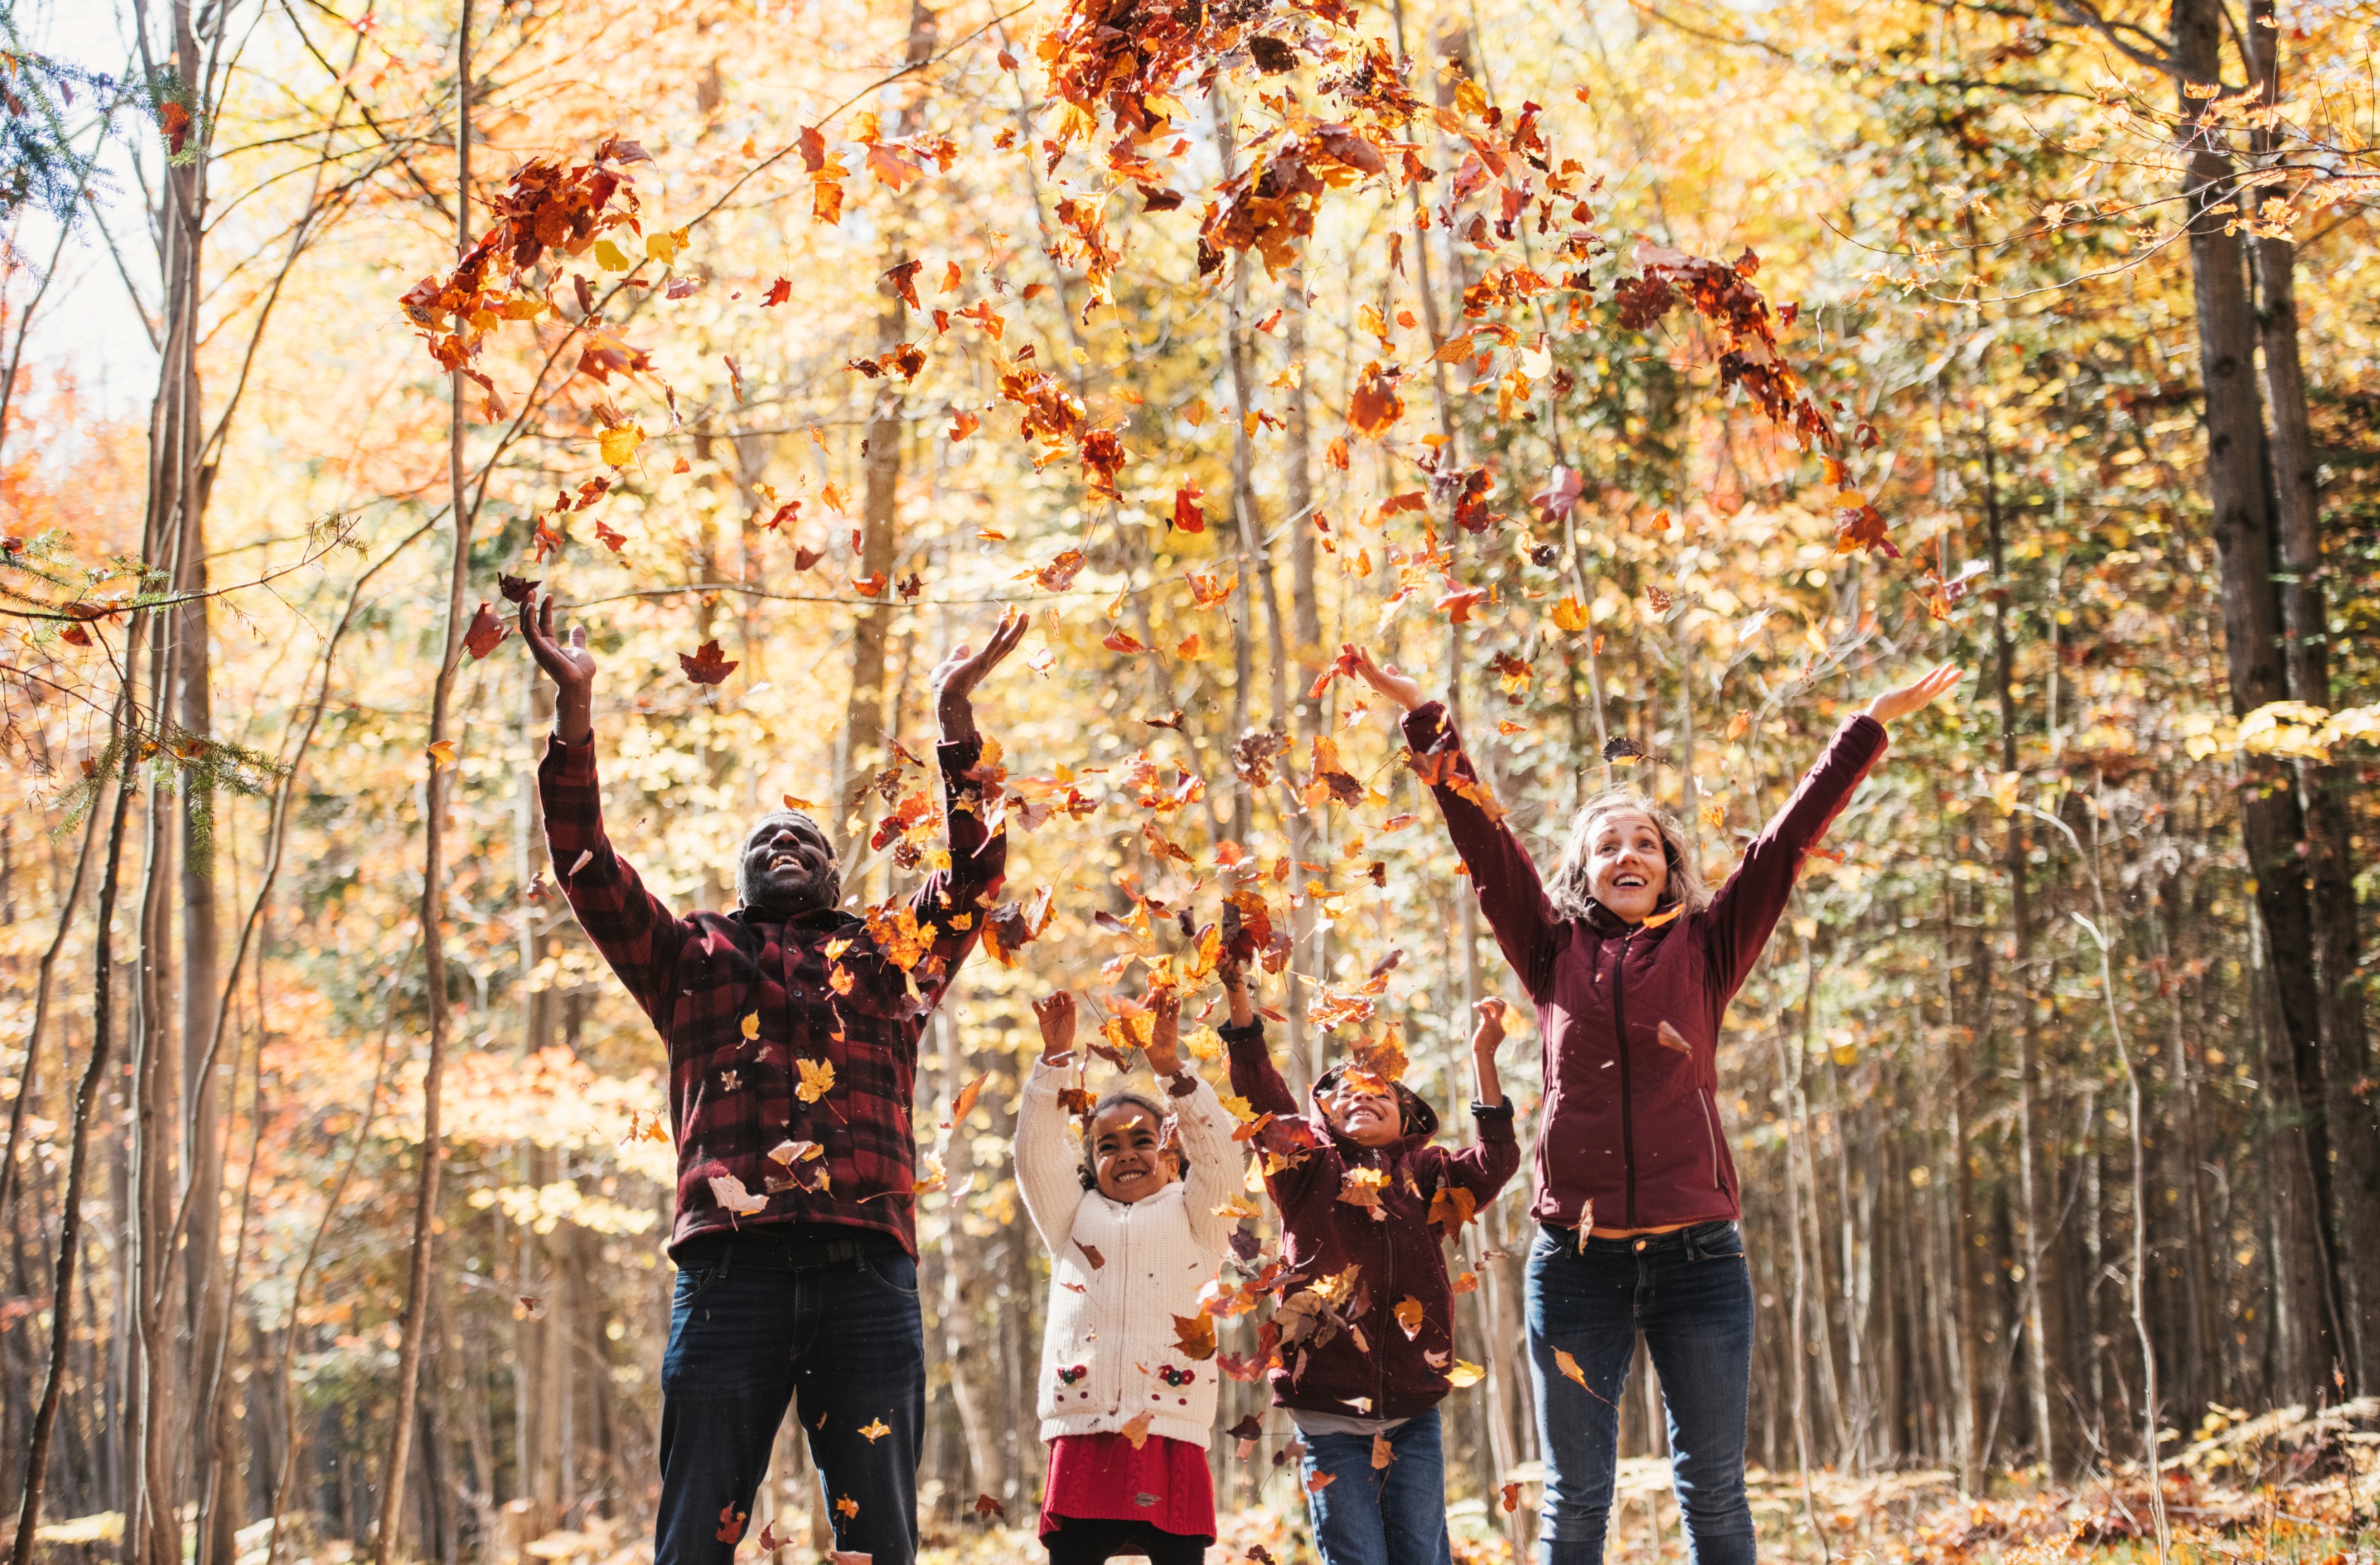 mixed-raced-family-in-a-forest-throwing-maple-leaves-picture-id1182680476